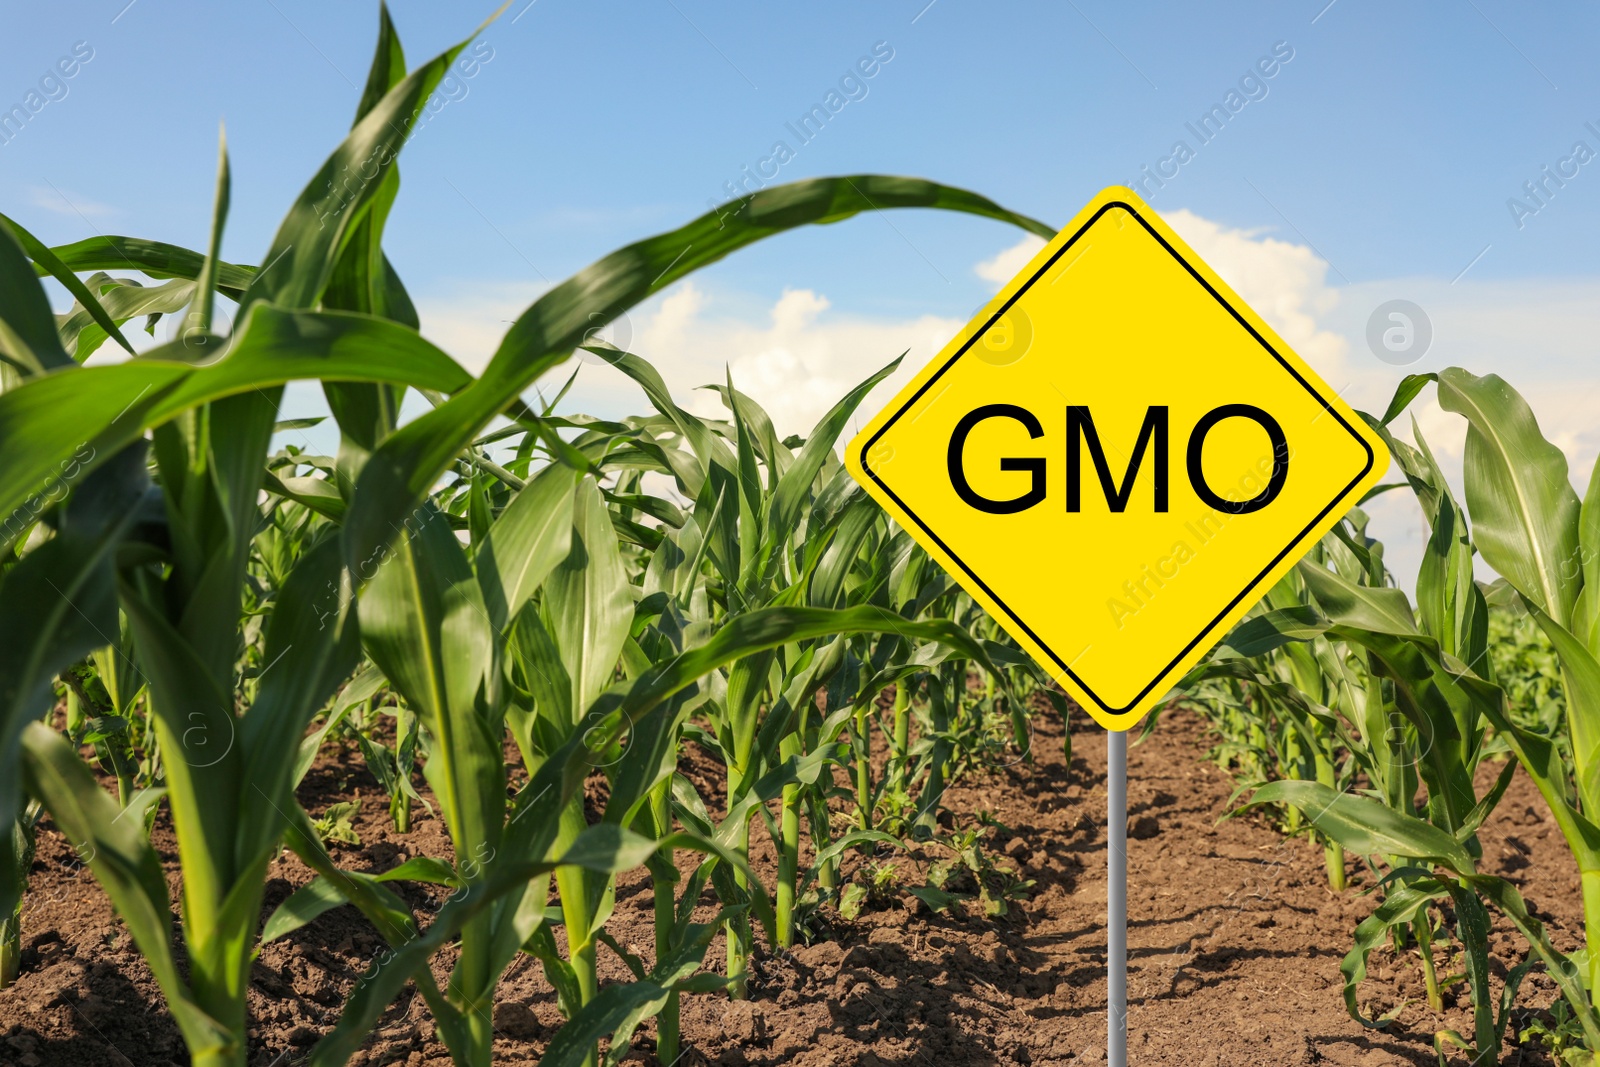 Image of Sign with abbreviation GMO in corn field on sunny day